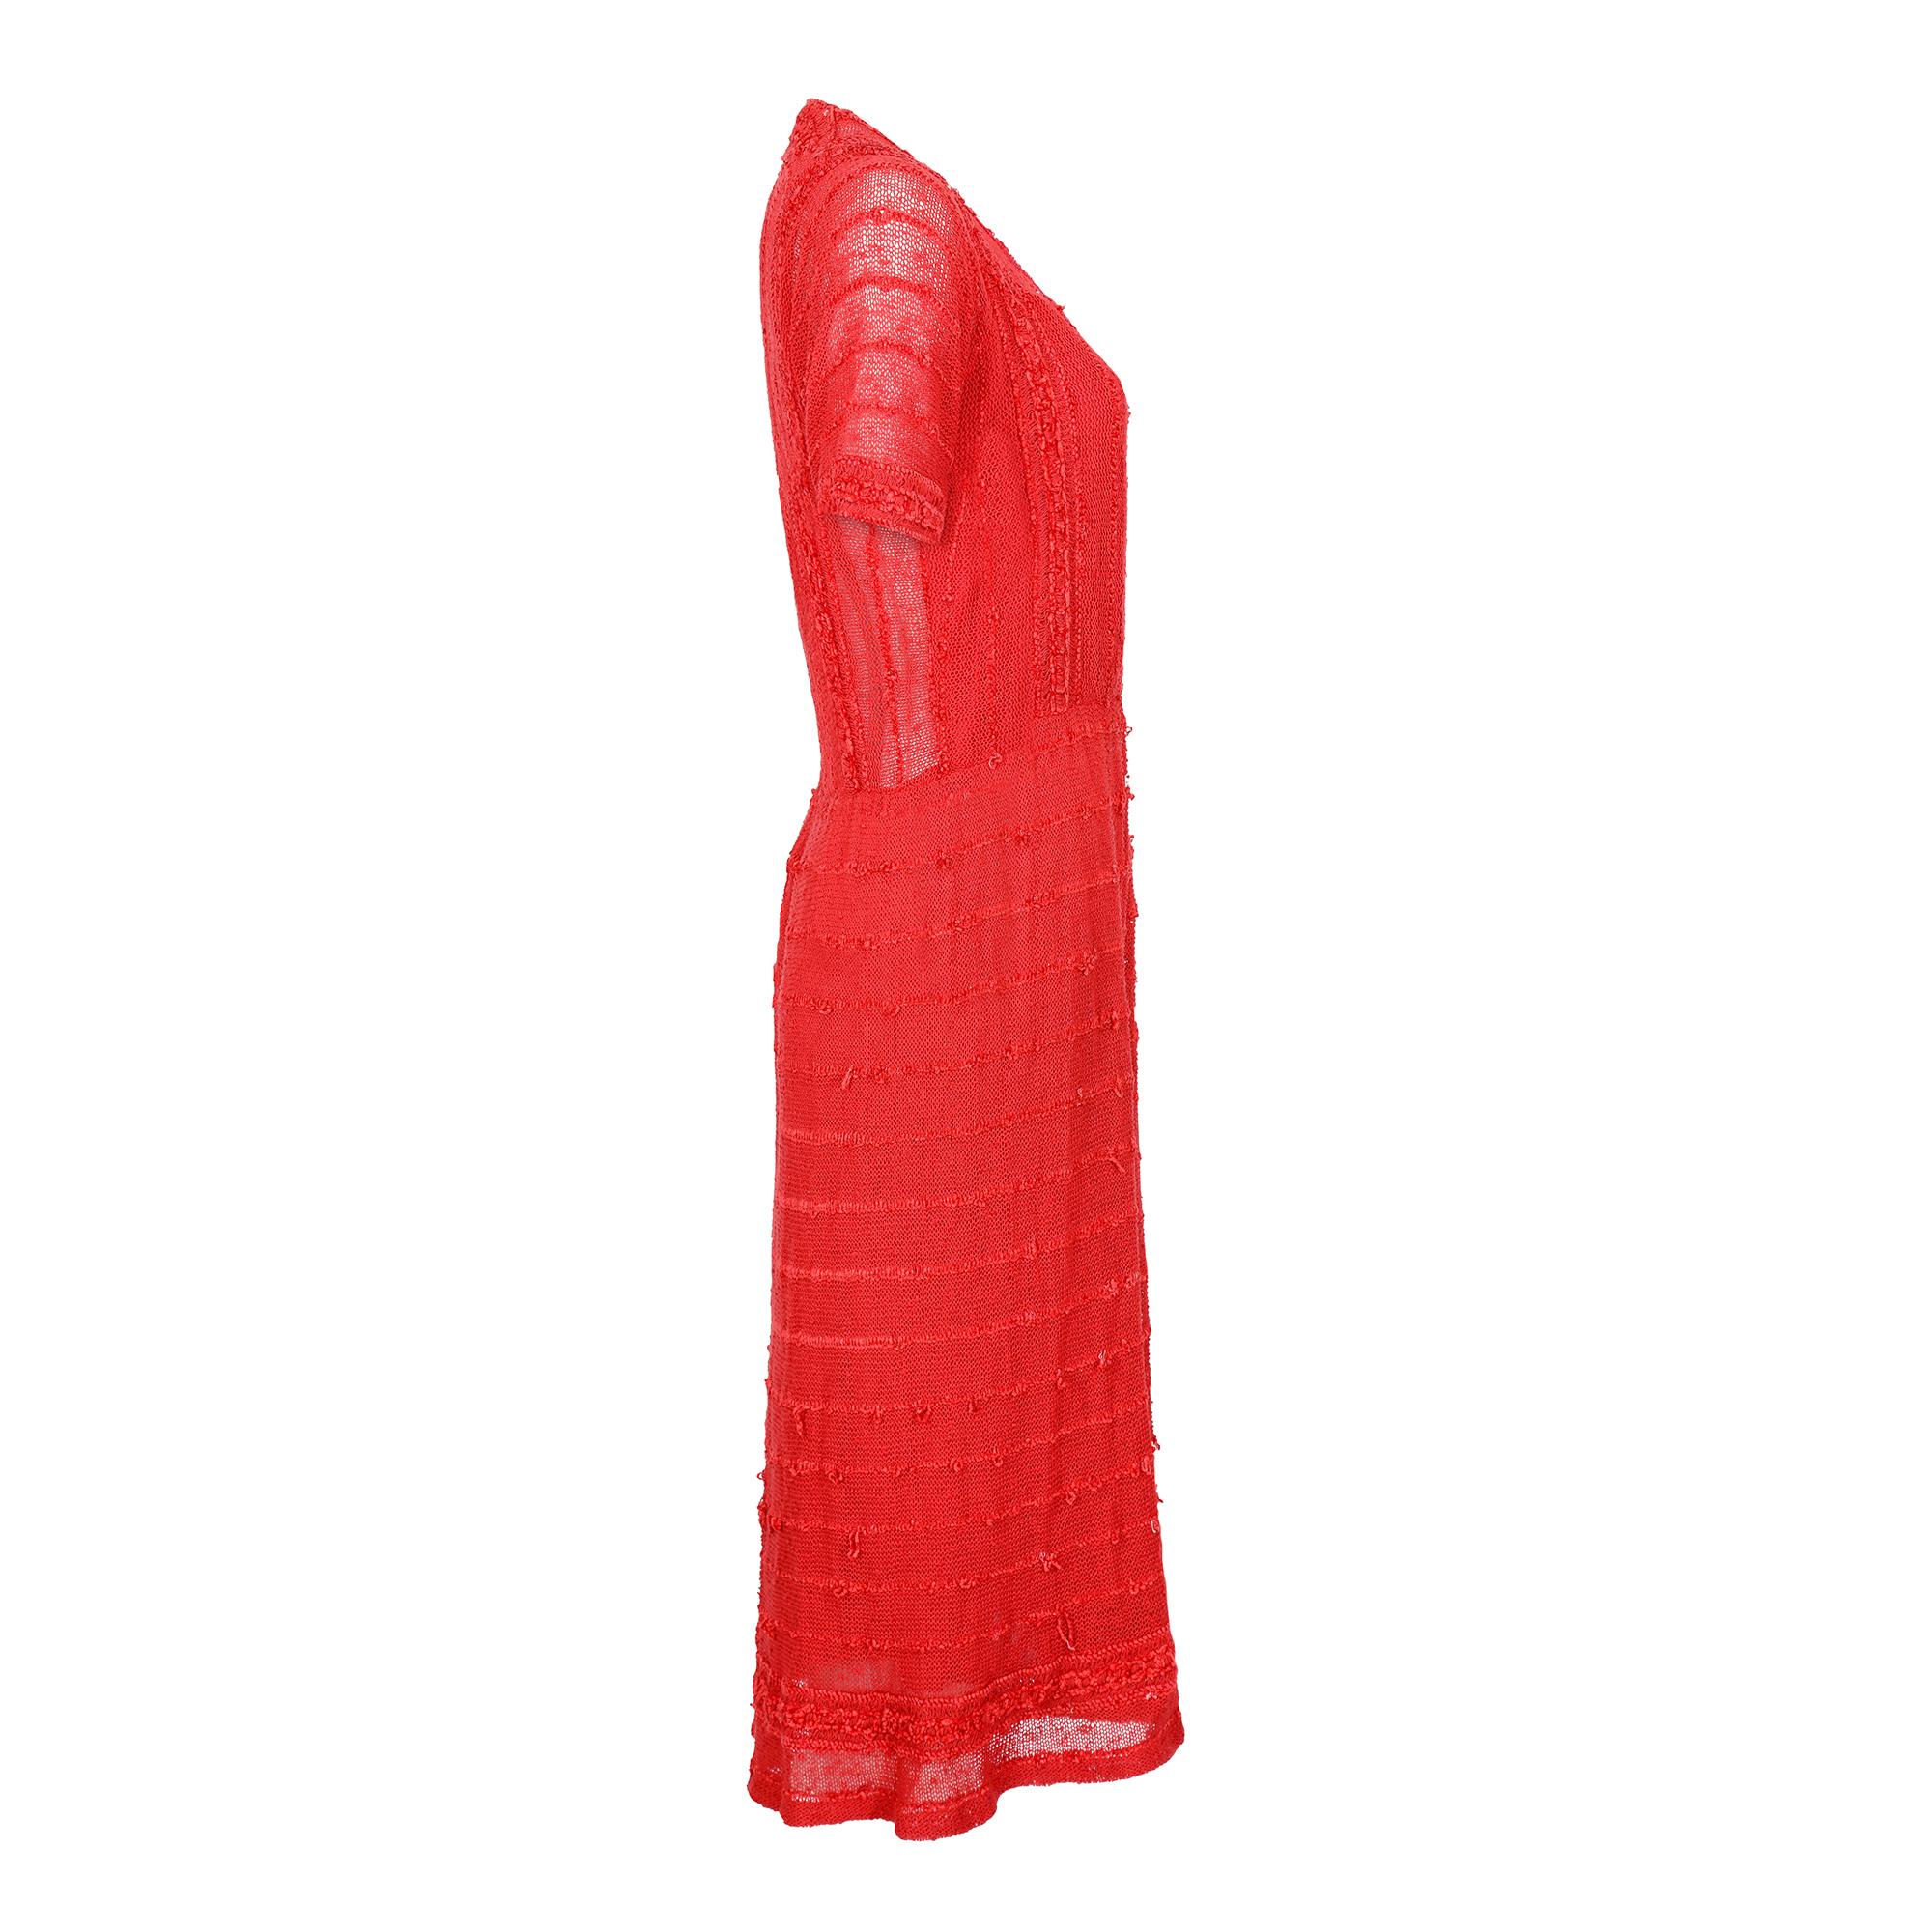 1970s bright red cotton crotchet and chenille knit dress labelled Chaumiere aux Tricots Paris and Made in France.  The dress is waisted and made of wide rows of horizontal and vertical bands interspersed with a single row of chenille velvet to add